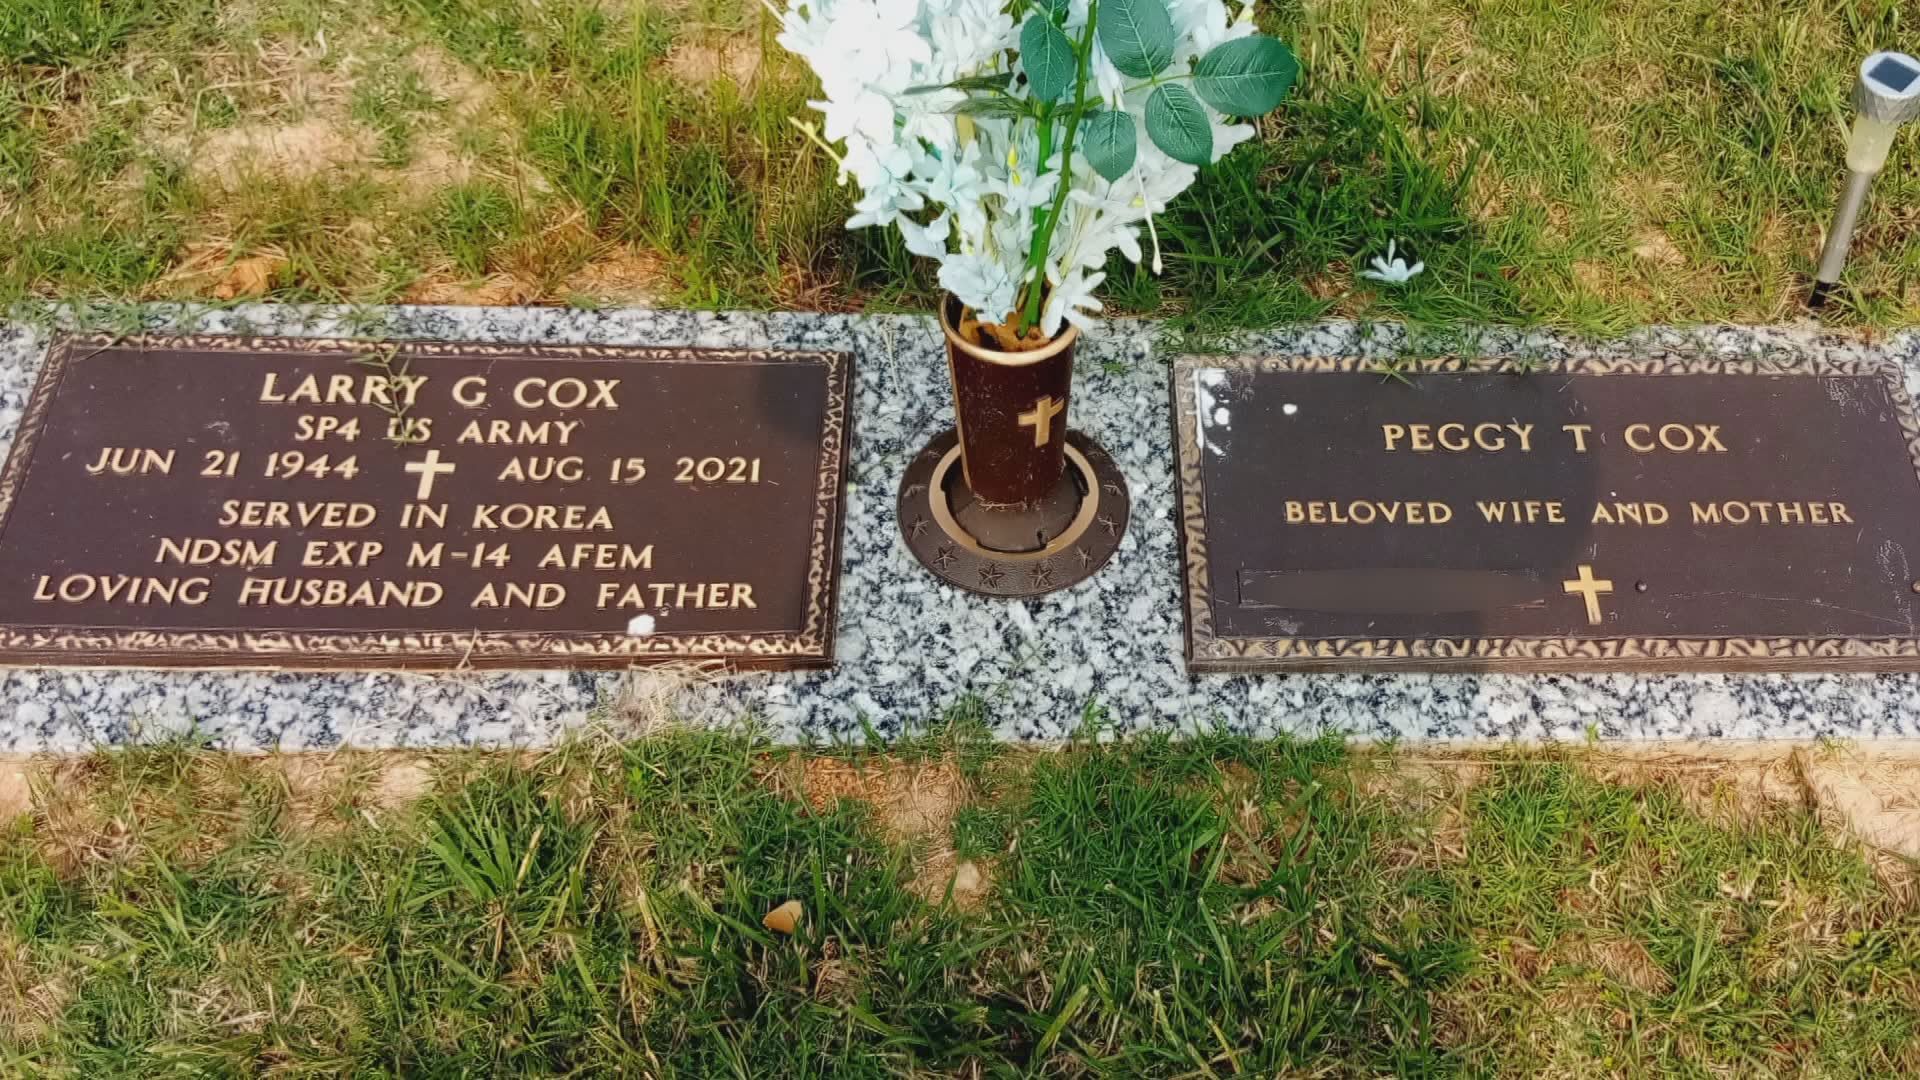 Peggy Cox was confused and hurt when she went to visit her husband's gravesite and saw a marker with another woman's name next to his.